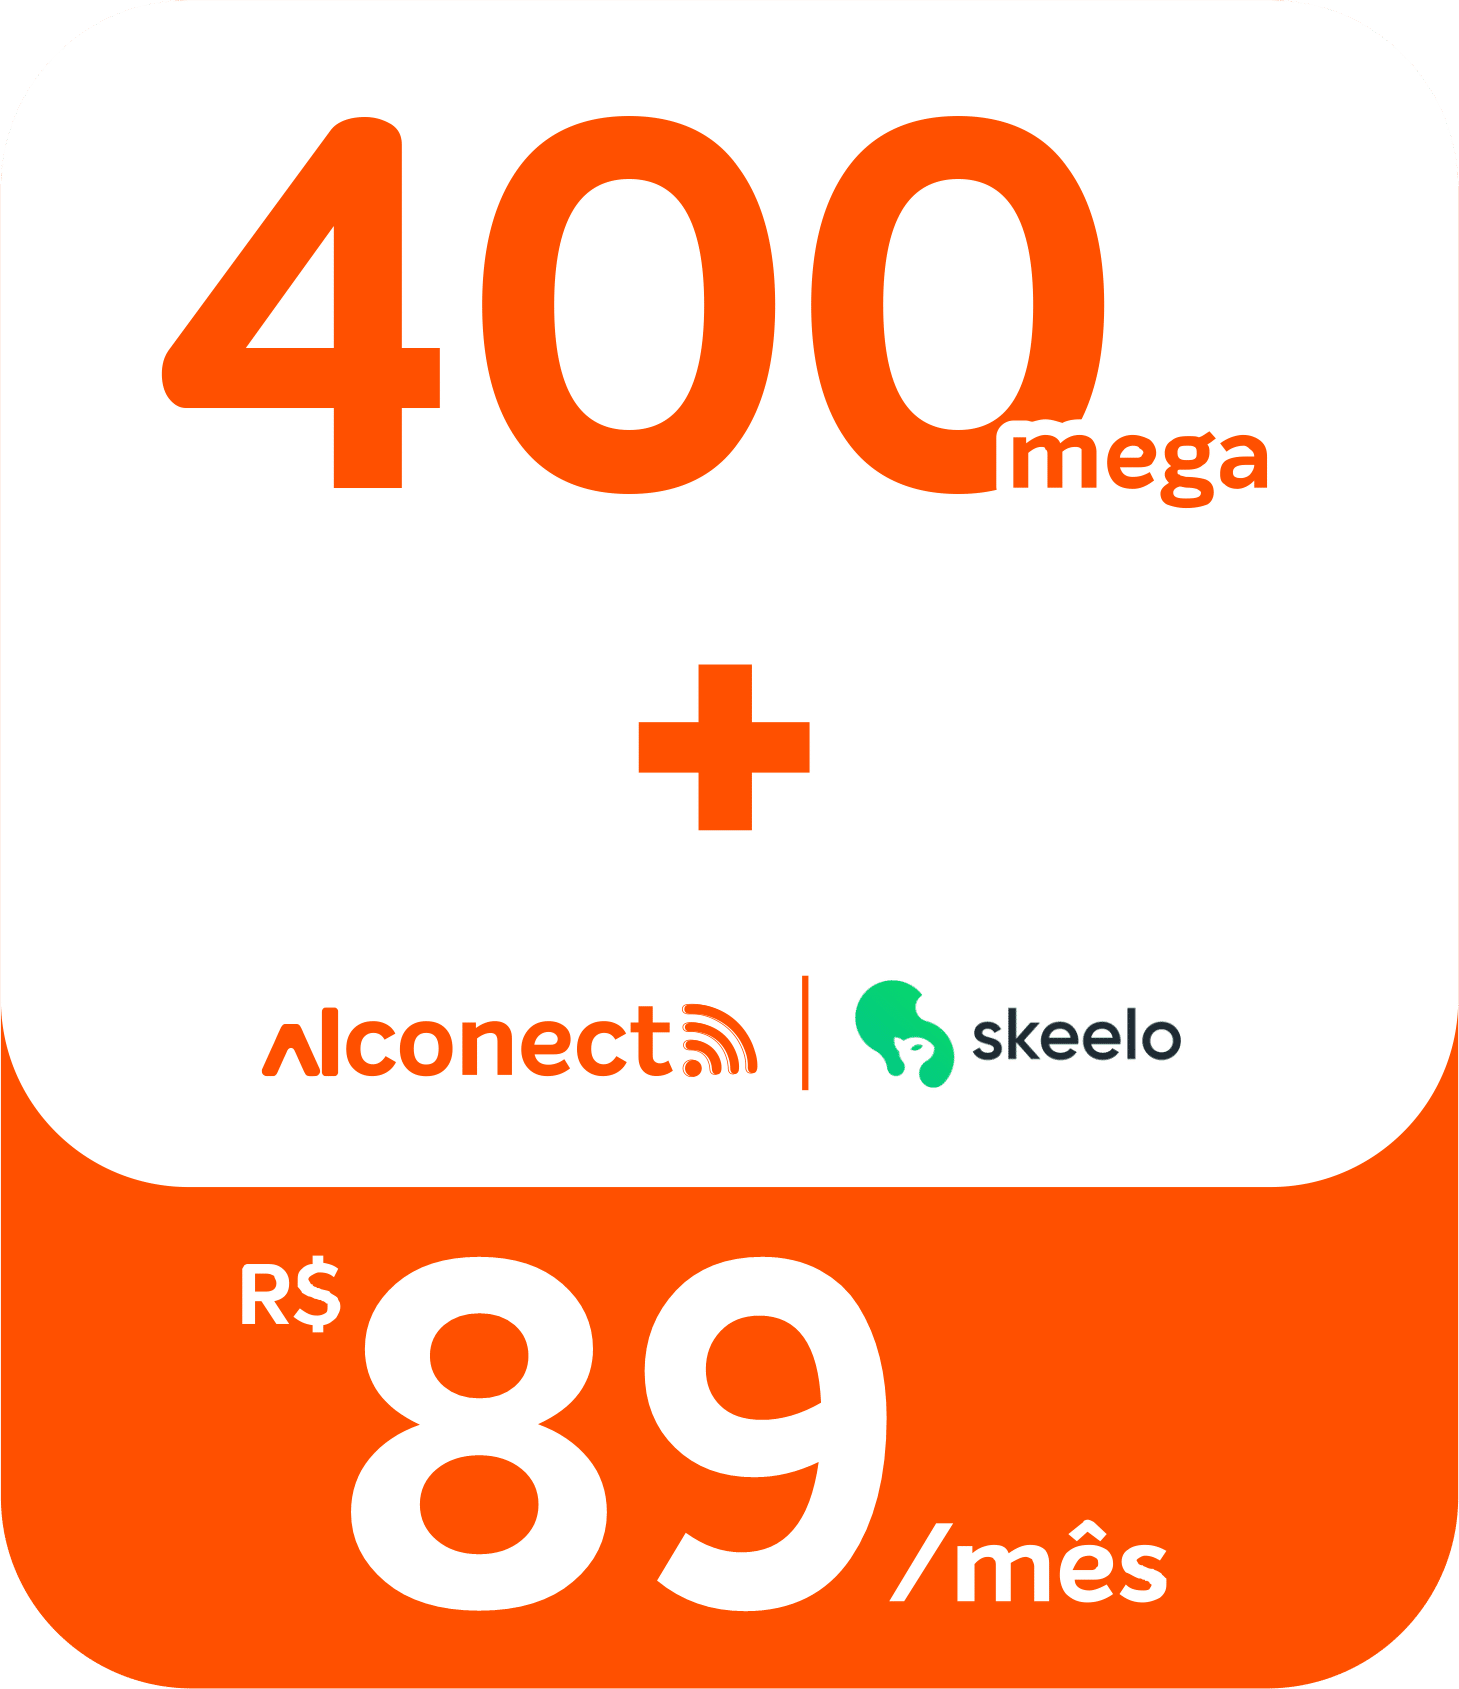 ALCONECT 400 MB R$ 89,00